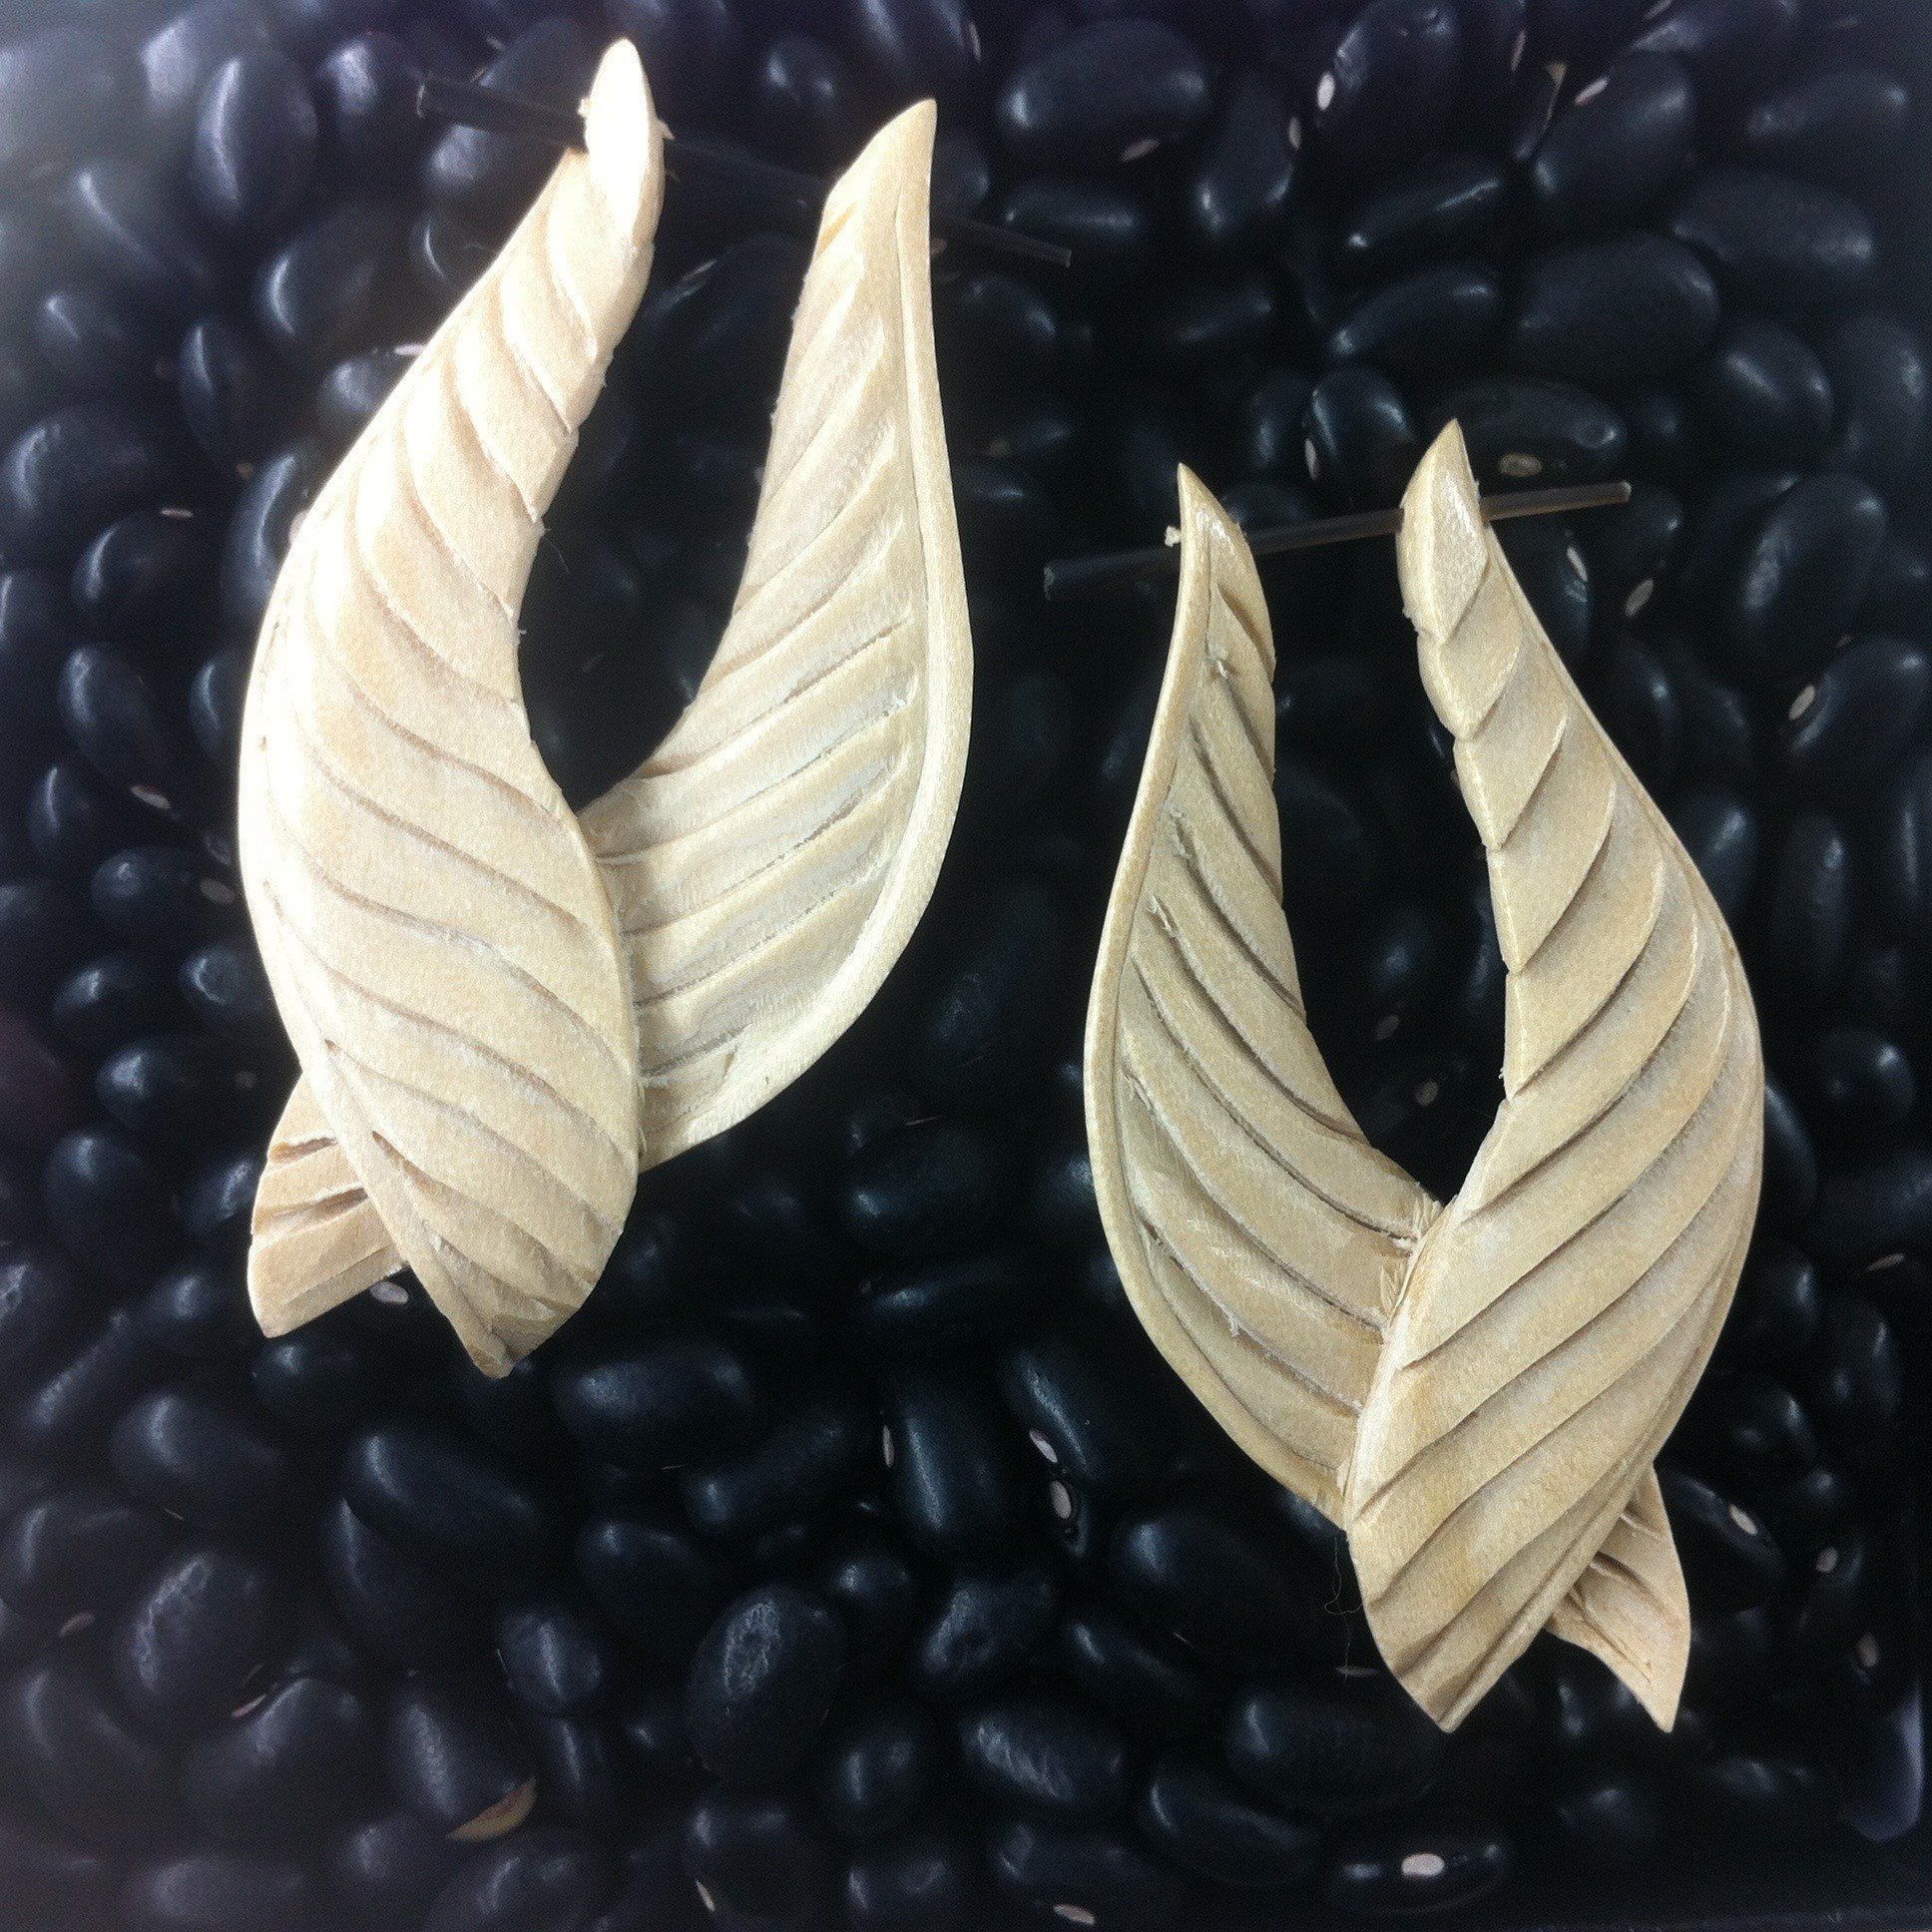 Natural Jewelry :|: Feathered Twist. Ivorywood. Wooden Earrings & Jewelry. Handmade. | Wooden Earrings